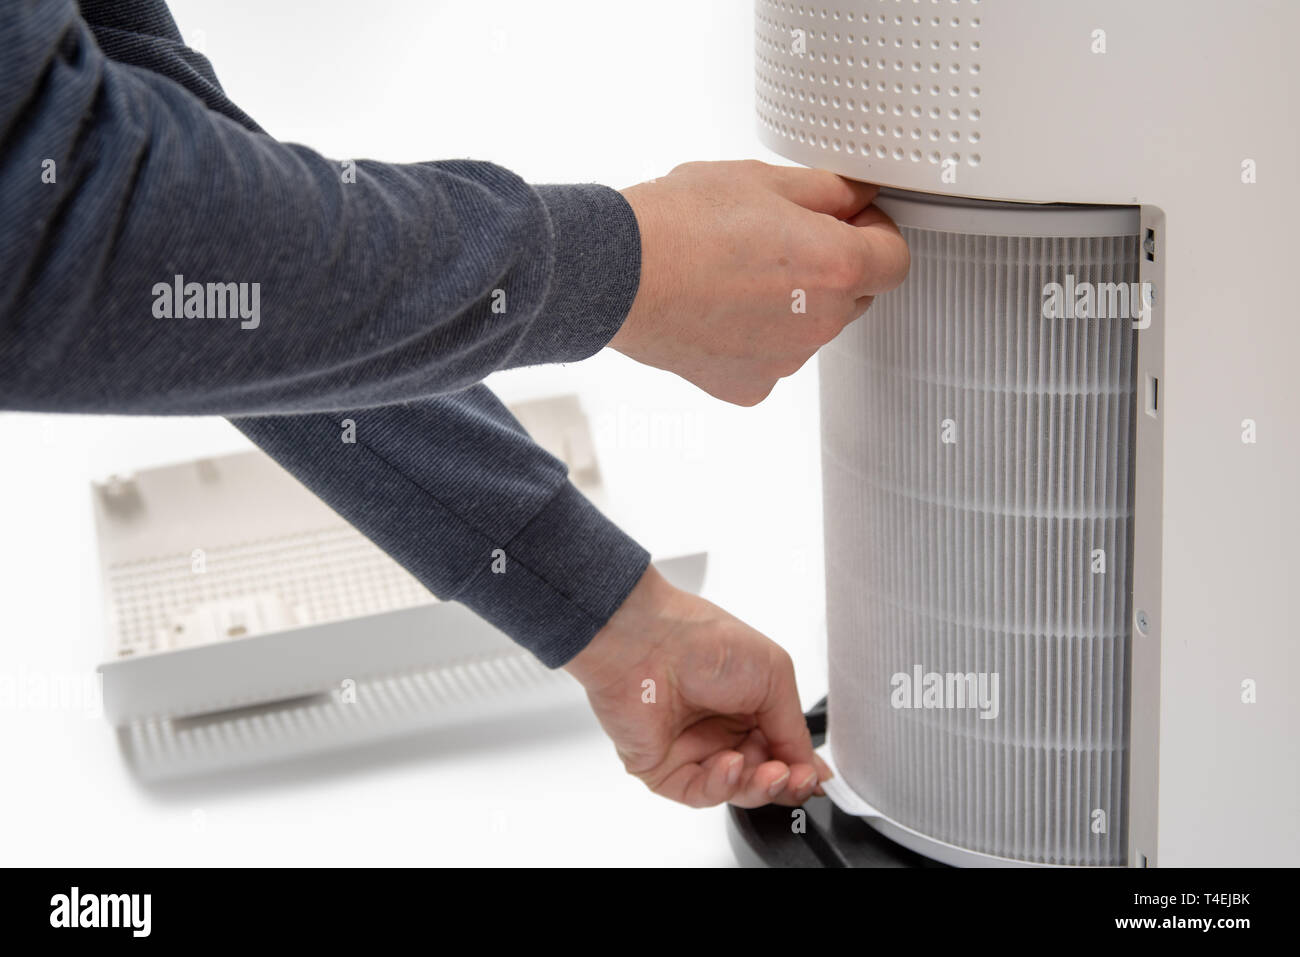 A man's hand turning an air purifier's filter into a new one. Stock Photo